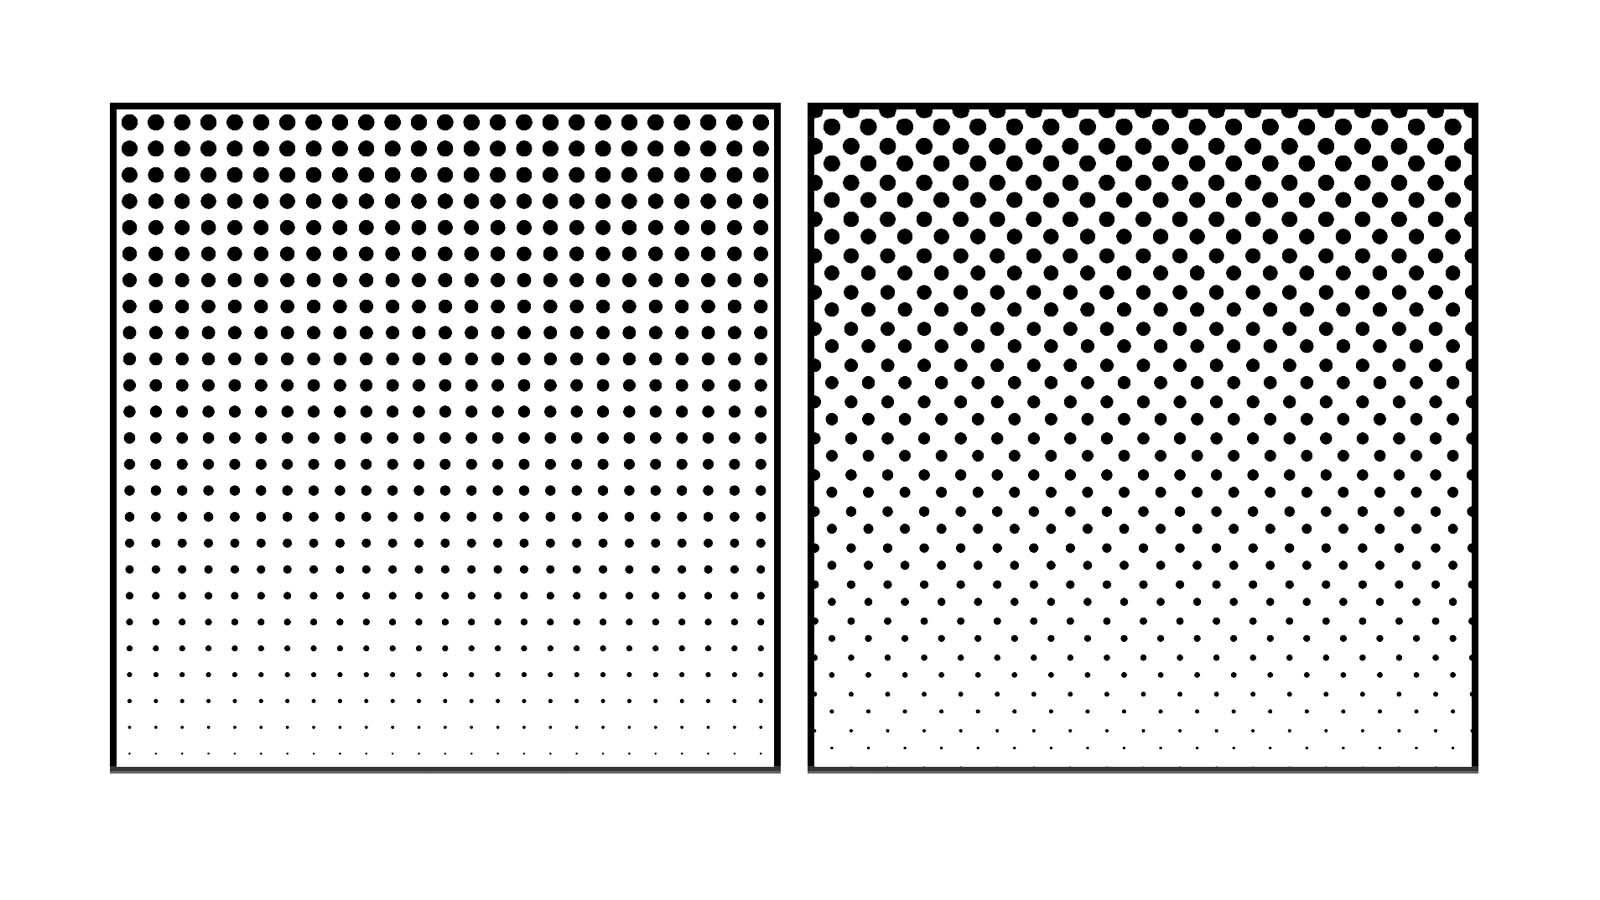 The two dotted patterns with a pleasing halftone effect, from larger dots at the top to smaller ones at the bottom